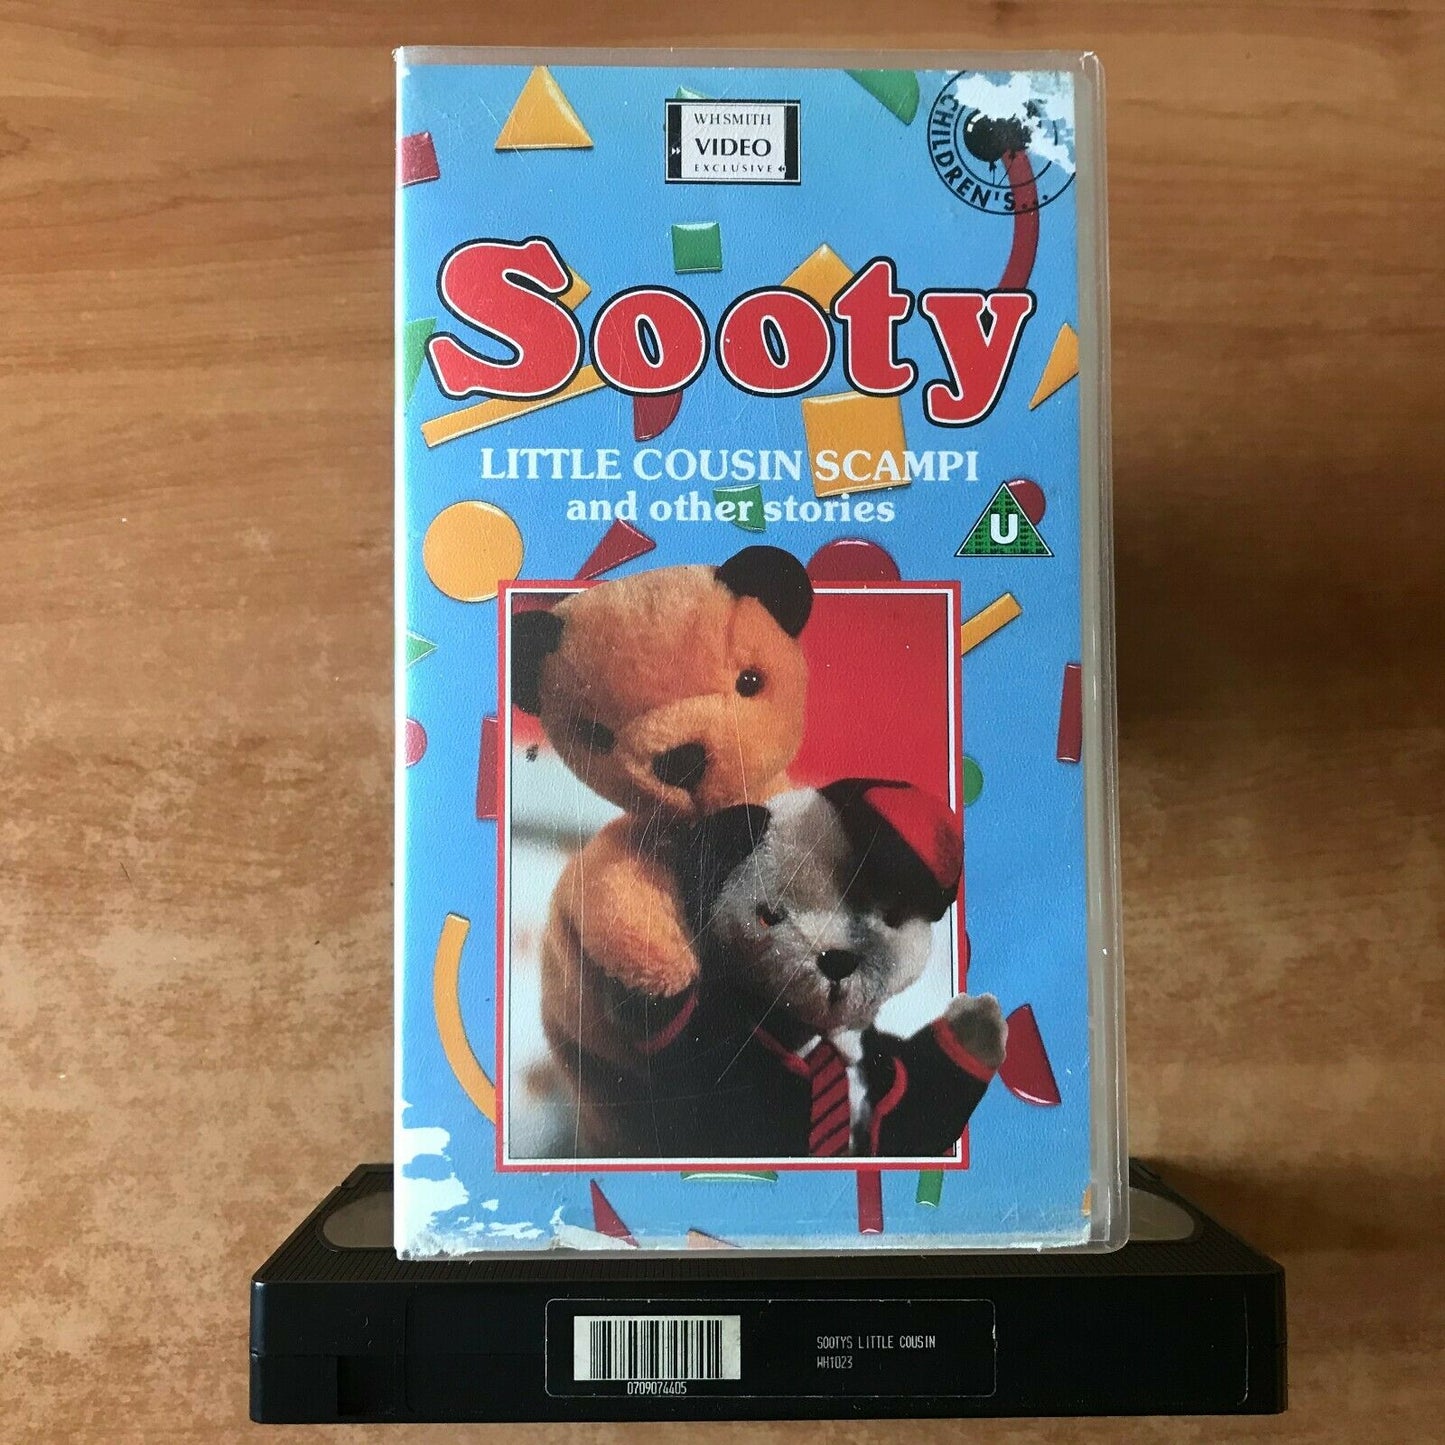 Sooty: Little Cousin Scampi; [WH Smith Video]: "Sticky Situation" - Kids - VHS-